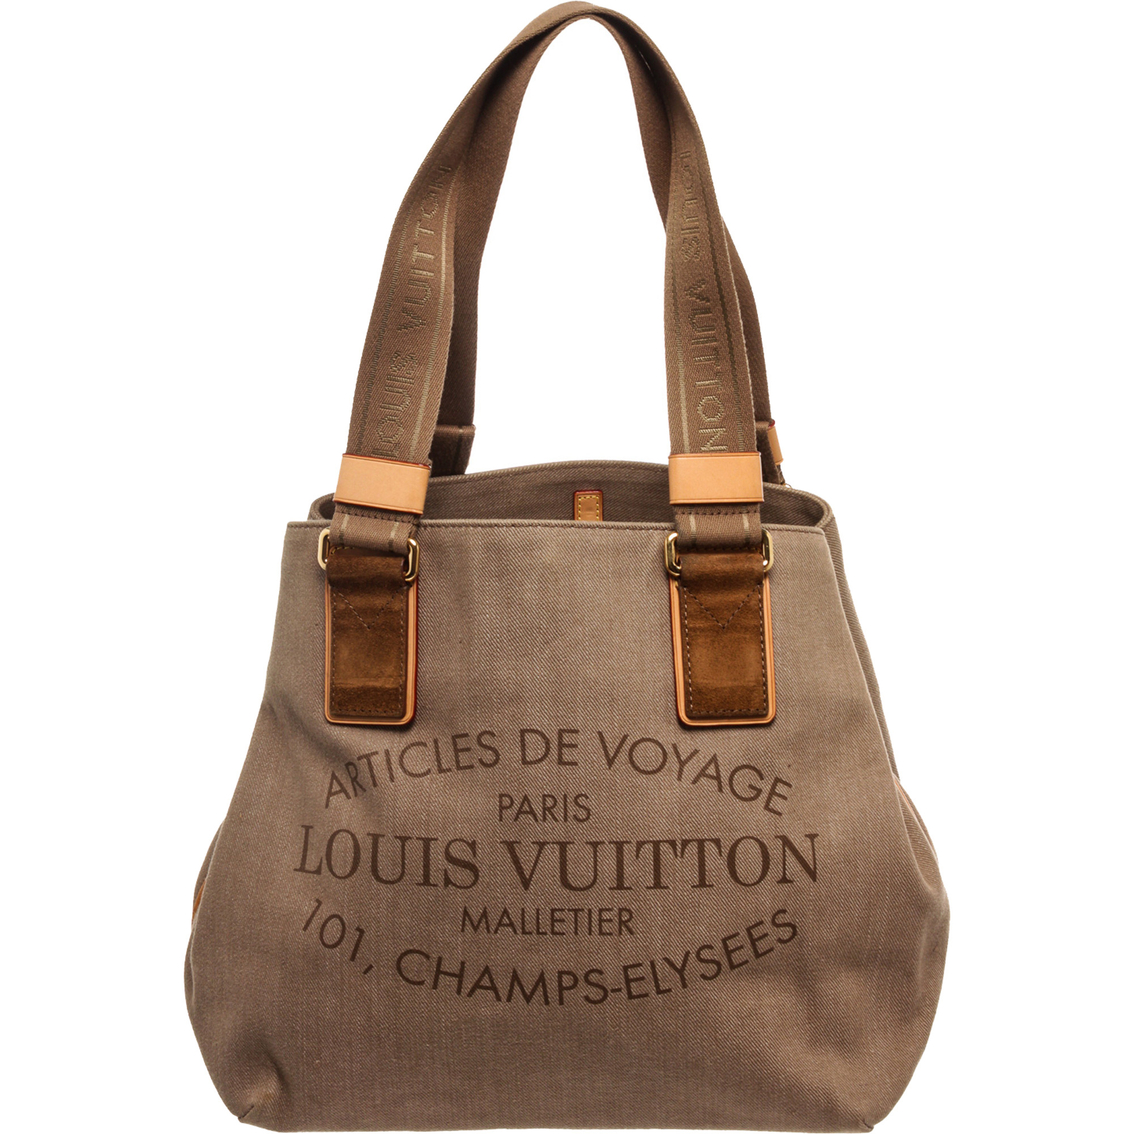 Authenticated Used LOUIS VUITTON Louis Vuitton Brasserie Silver